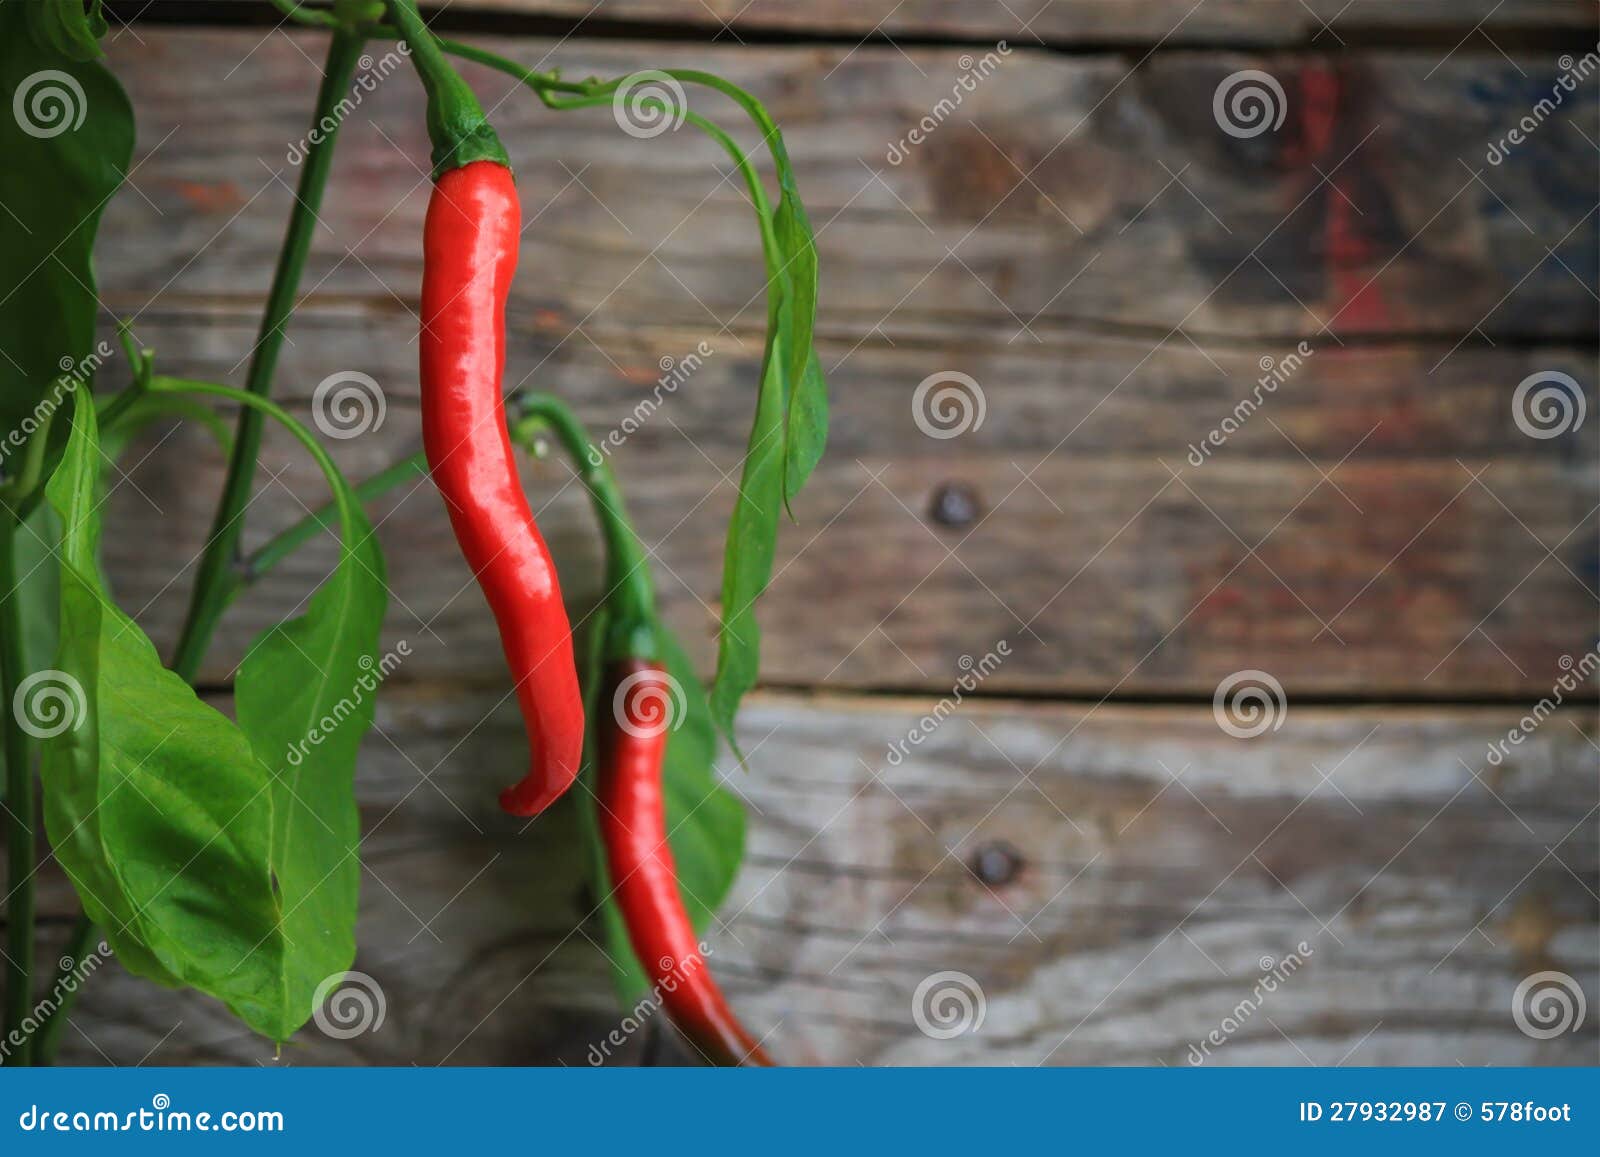 Chili Wallpaper Vector Images over 1700